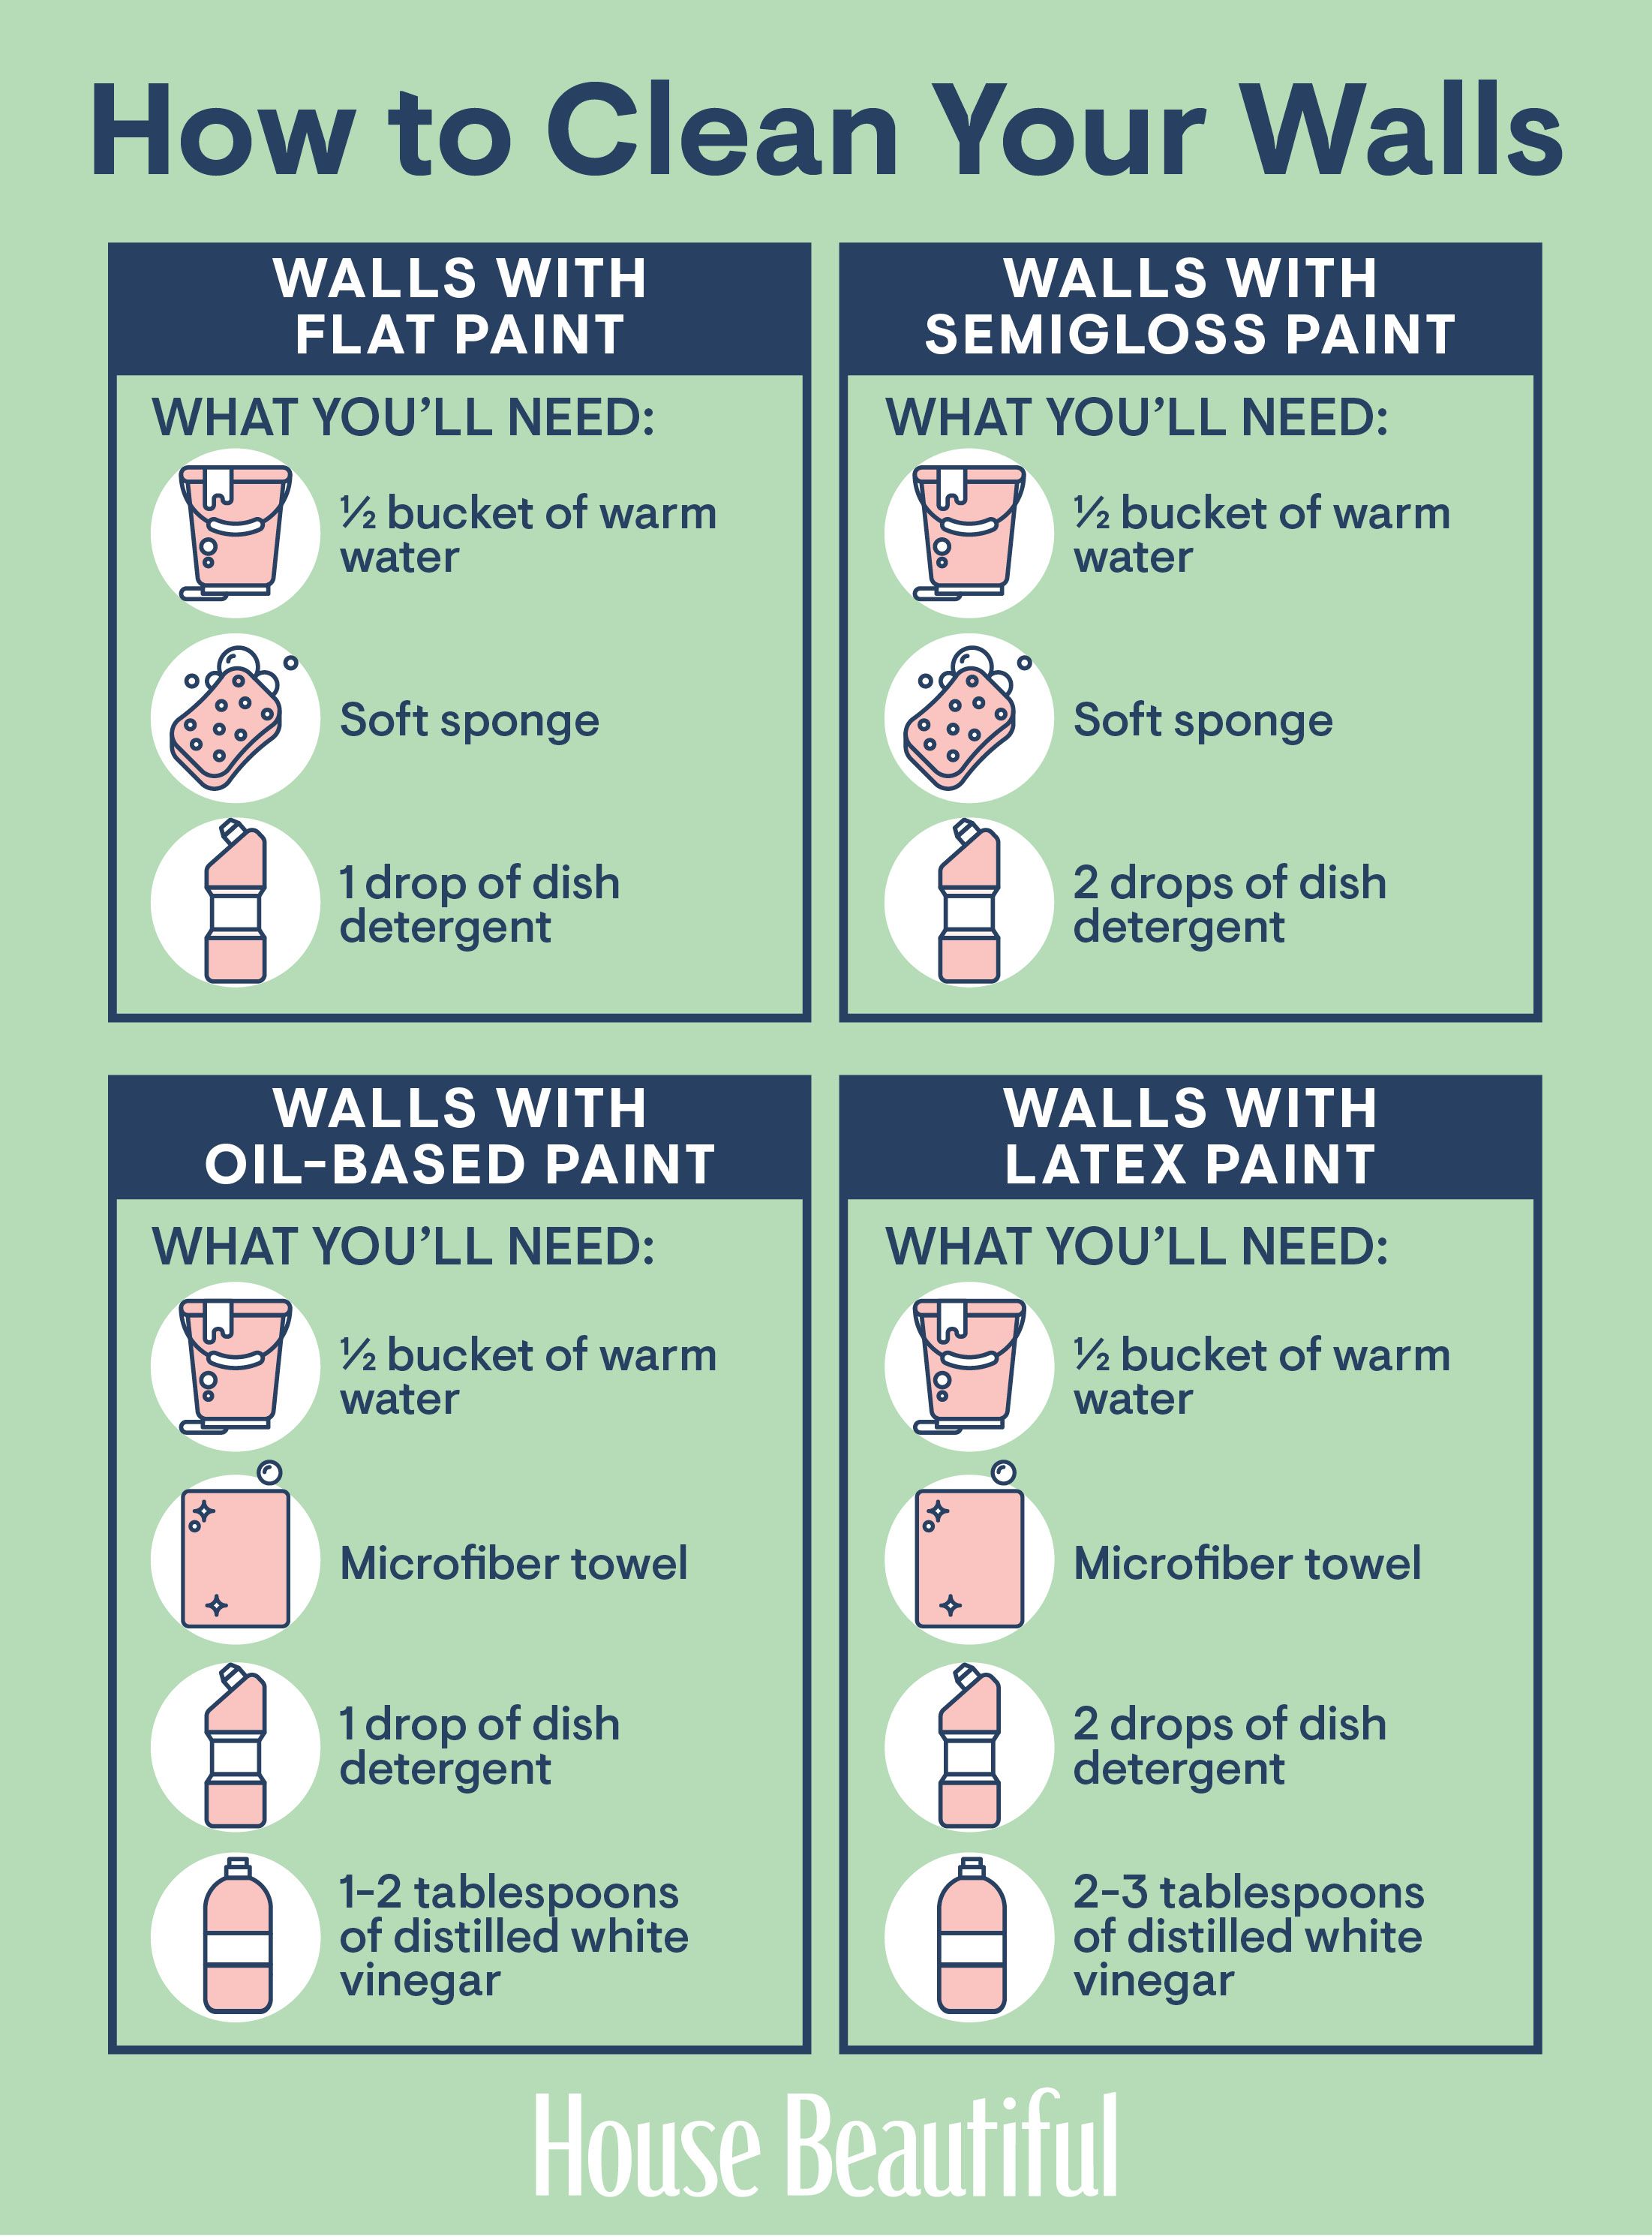 Everything You Need to Know to Clean Your Walls